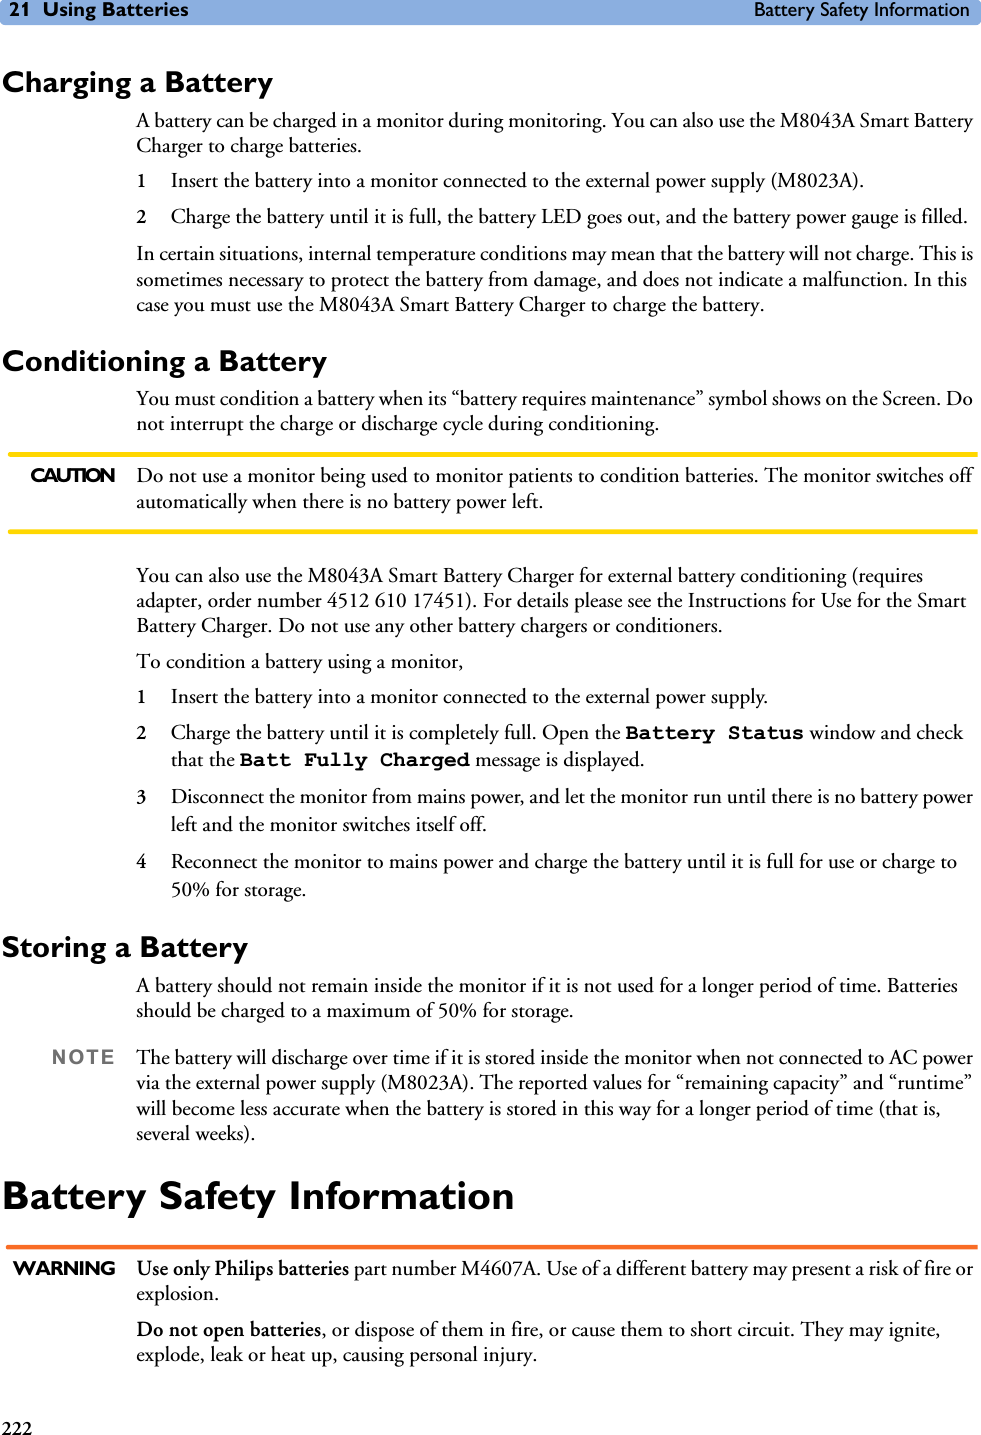 21 Using Batteries Battery Safety Information222Charging a BatteryA battery can be charged in a monitor during monitoring. You can also use the M8043A Smart Battery Charger to charge batteries.1Insert the battery into a monitor connected to the external power supply (M8023A).2Charge the battery until it is full, the battery LED goes out, and the battery power gauge is filled.In certain situations, internal temperature conditions may mean that the battery will not charge. This is sometimes necessary to protect the battery from damage, and does not indicate a malfunction. In this case you must use the M8043A Smart Battery Charger to charge the battery.Conditioning a BatteryYou must condition a battery when its “battery requires maintenance” symbol shows on the Screen. Do not interrupt the charge or discharge cycle during conditioning. CAUTION Do not use a monitor being used to monitor patients to condition batteries. The monitor switches off automatically when there is no battery power left.You can also use the M8043A Smart Battery Charger for external battery conditioning (requires adapter, order number 4512 610 17451). For details please see the Instructions for Use for the Smart Battery Charger. Do not use any other battery chargers or conditioners.To condition a battery using a monitor, 1Insert the battery into a monitor connected to the external power supply.2Charge the battery until it is completely full. Open the Battery Status window and check that the Batt Fully Charged message is displayed. 3Disconnect the monitor from mains power, and let the monitor run until there is no battery power left and the monitor switches itself off.4Reconnect the monitor to mains power and charge the battery until it is full for use or charge to 50% for storage.Storing a BatteryA battery should not remain inside the monitor if it is not used for a longer period of time. Batteries should be charged to a maximum of 50% for storage. NOTE The battery will discharge over time if it is stored inside the monitor when not connected to AC power via the external power supply (M8023A). The reported values for “remaining capacity” and “runtime” will become less accurate when the battery is stored in this way for a longer period of time (that is, several weeks).Battery Safety InformationWARNING Use only Philips batteries part number M4607A. Use of a different battery may present a risk of fire or explosion.Do not open batteries, or dispose of them in fire, or cause them to short circuit. They may ignite, explode, leak or heat up, causing personal injury.